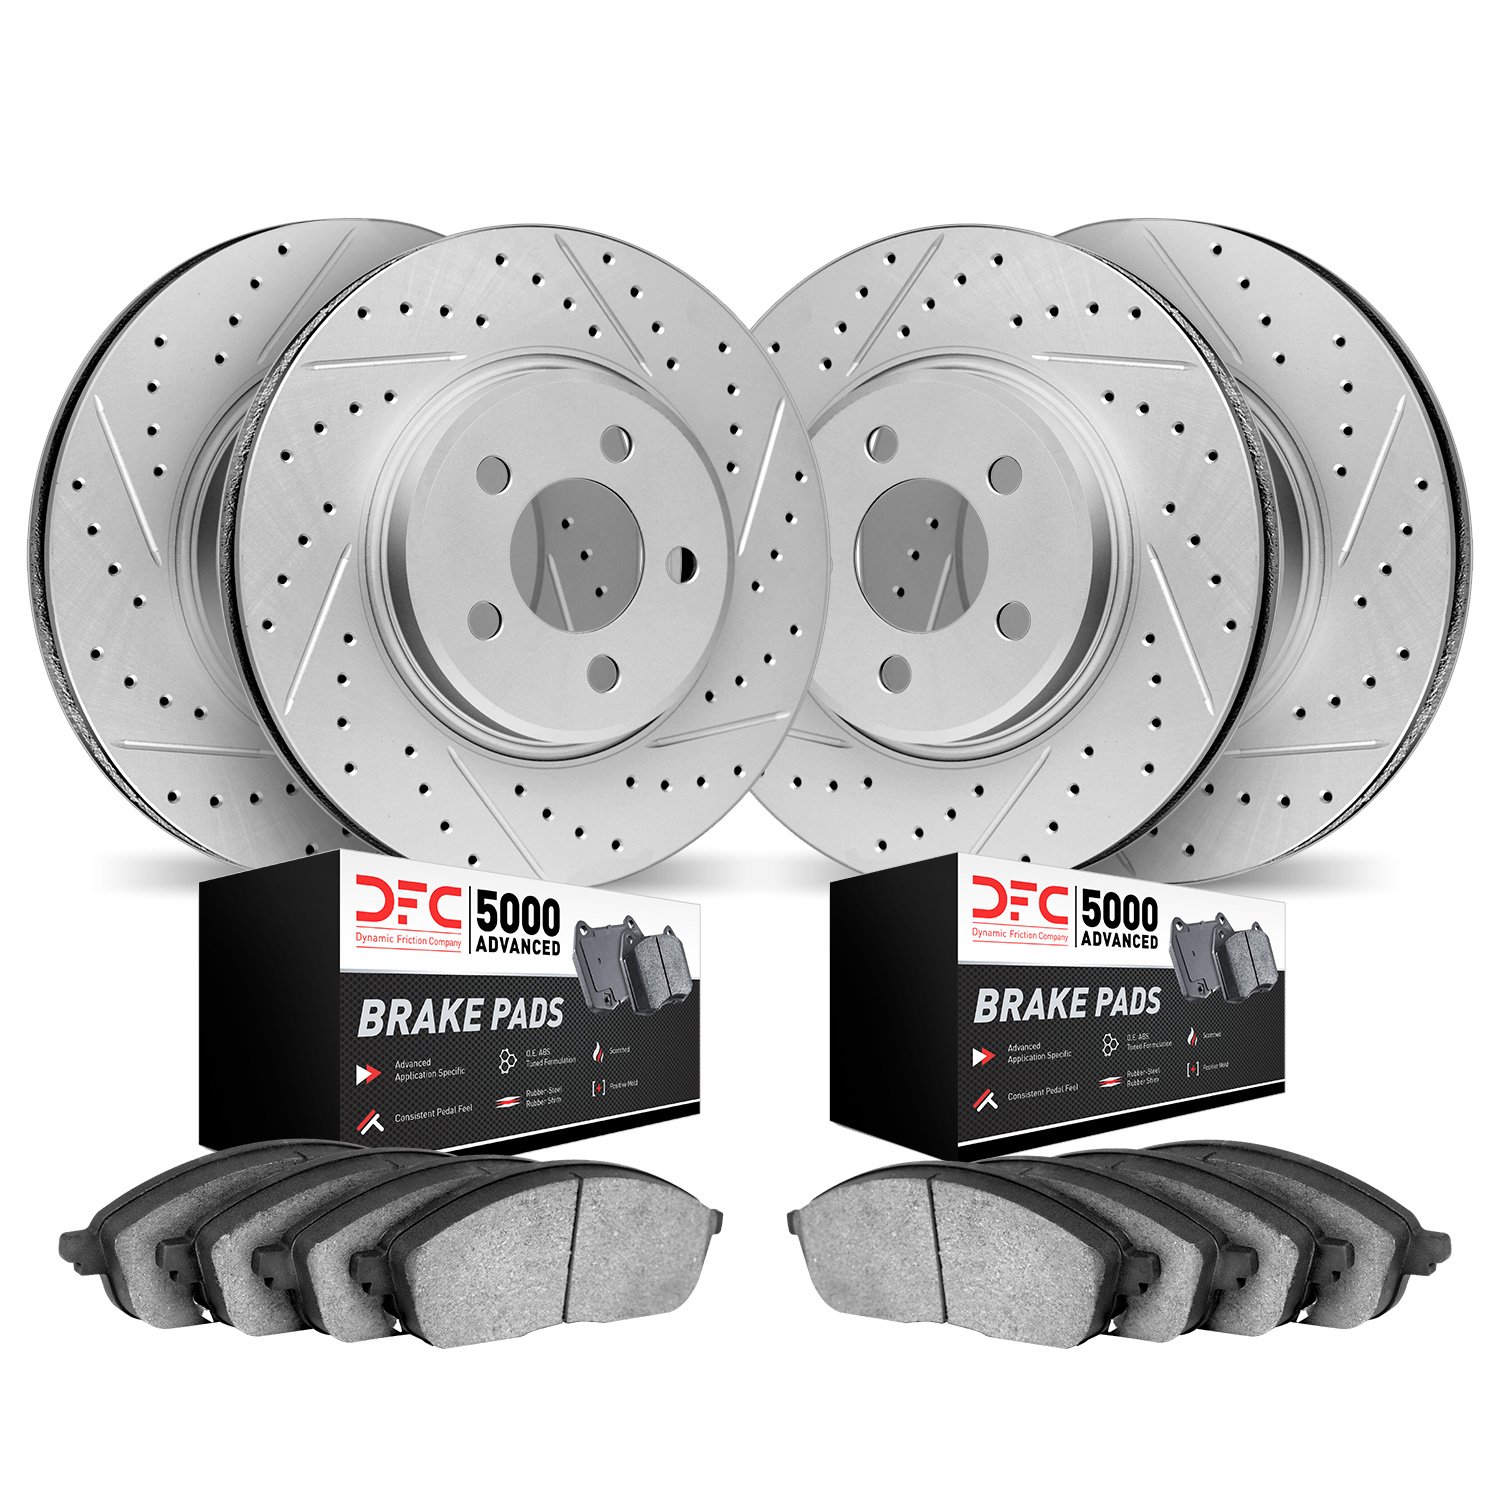 2504-67077 Geoperformance Drilled/Slotted Rotors w/5000 Advanced Brake Pads Kit, Fits Select Infiniti/Nissan, Position: Front an